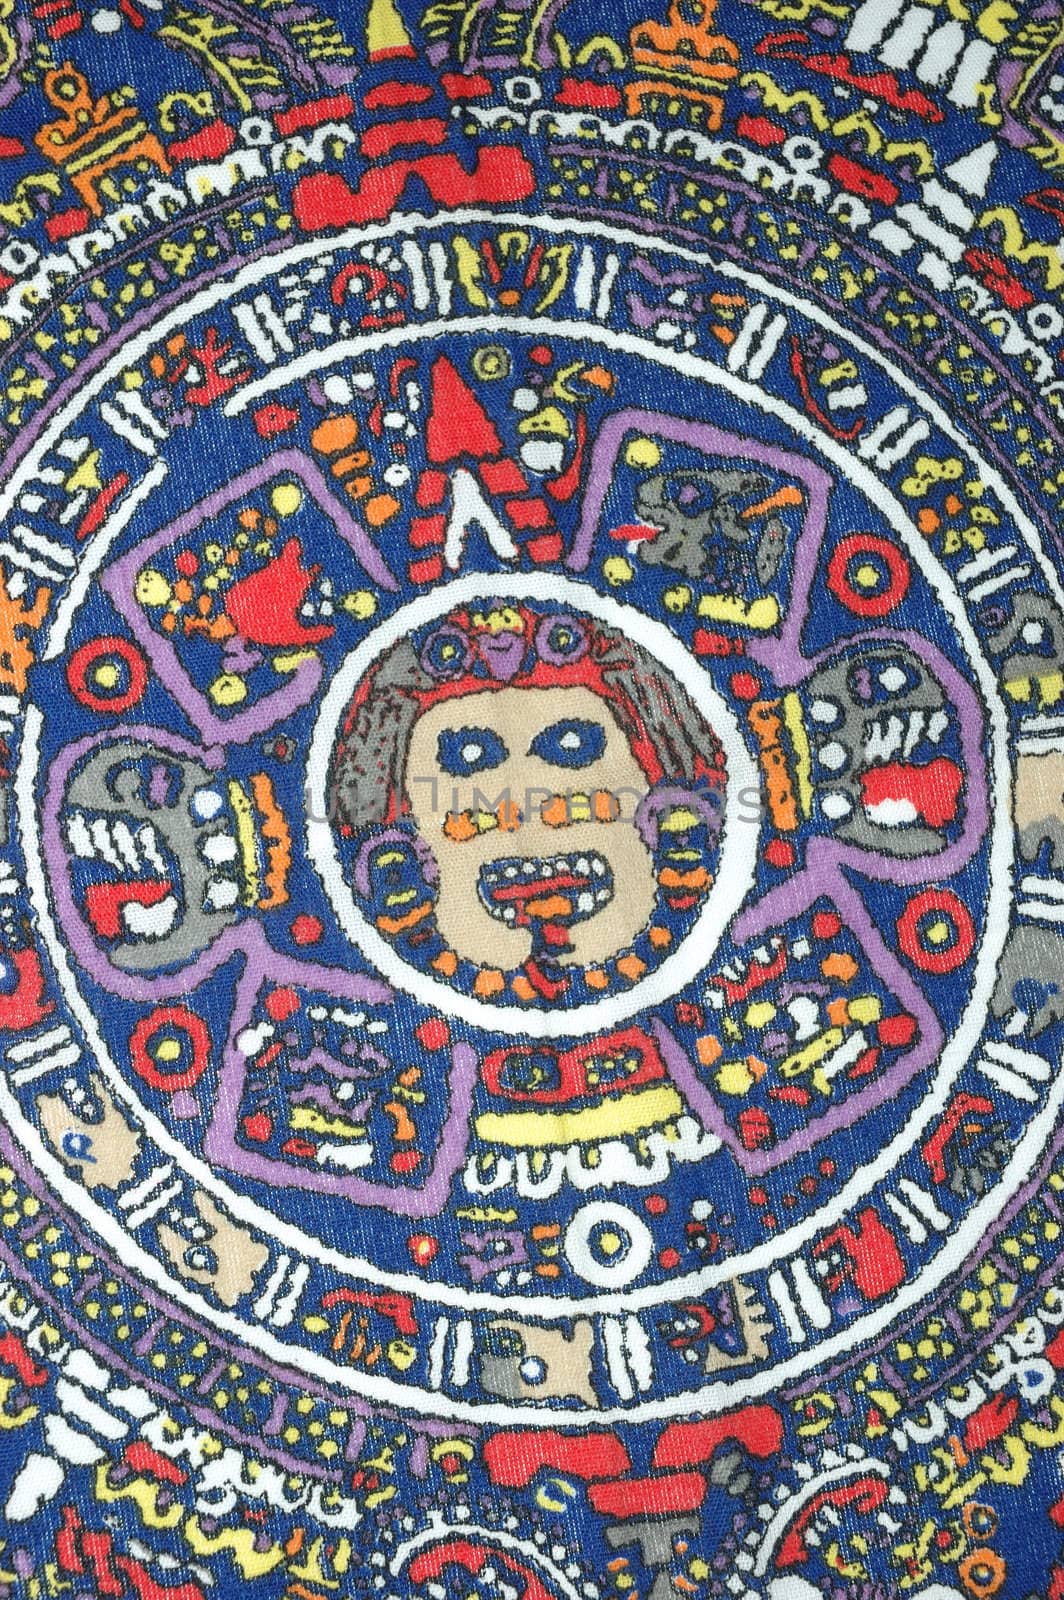 Ancient aztec calendar. Mexican heritage and traditions